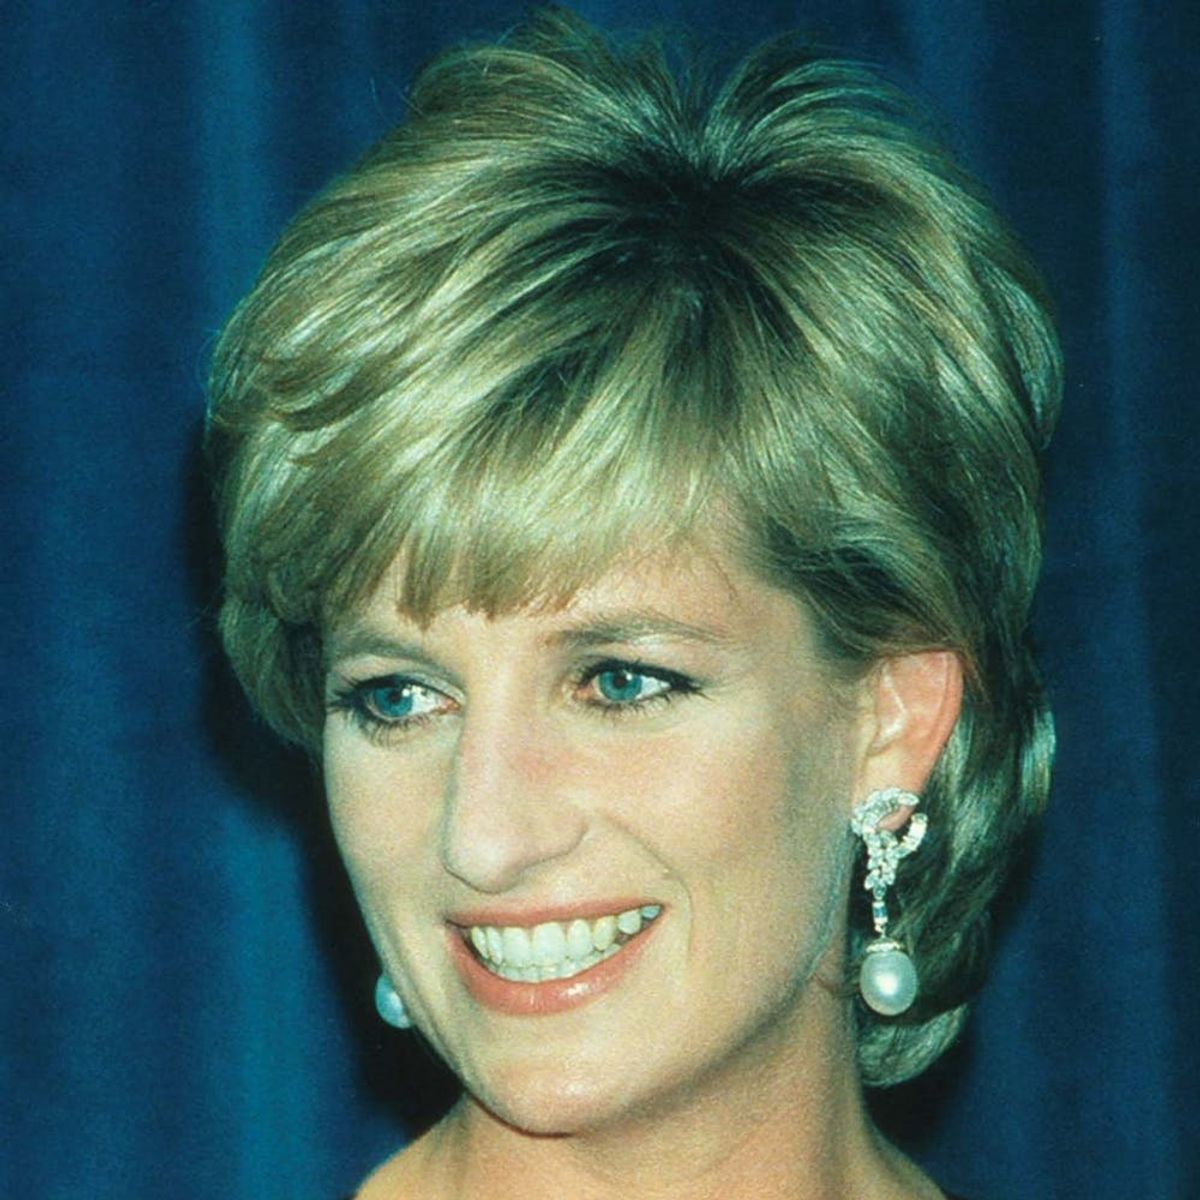 People Are SUPER Unhappy With This Floral Art Tribute to Princess Diana